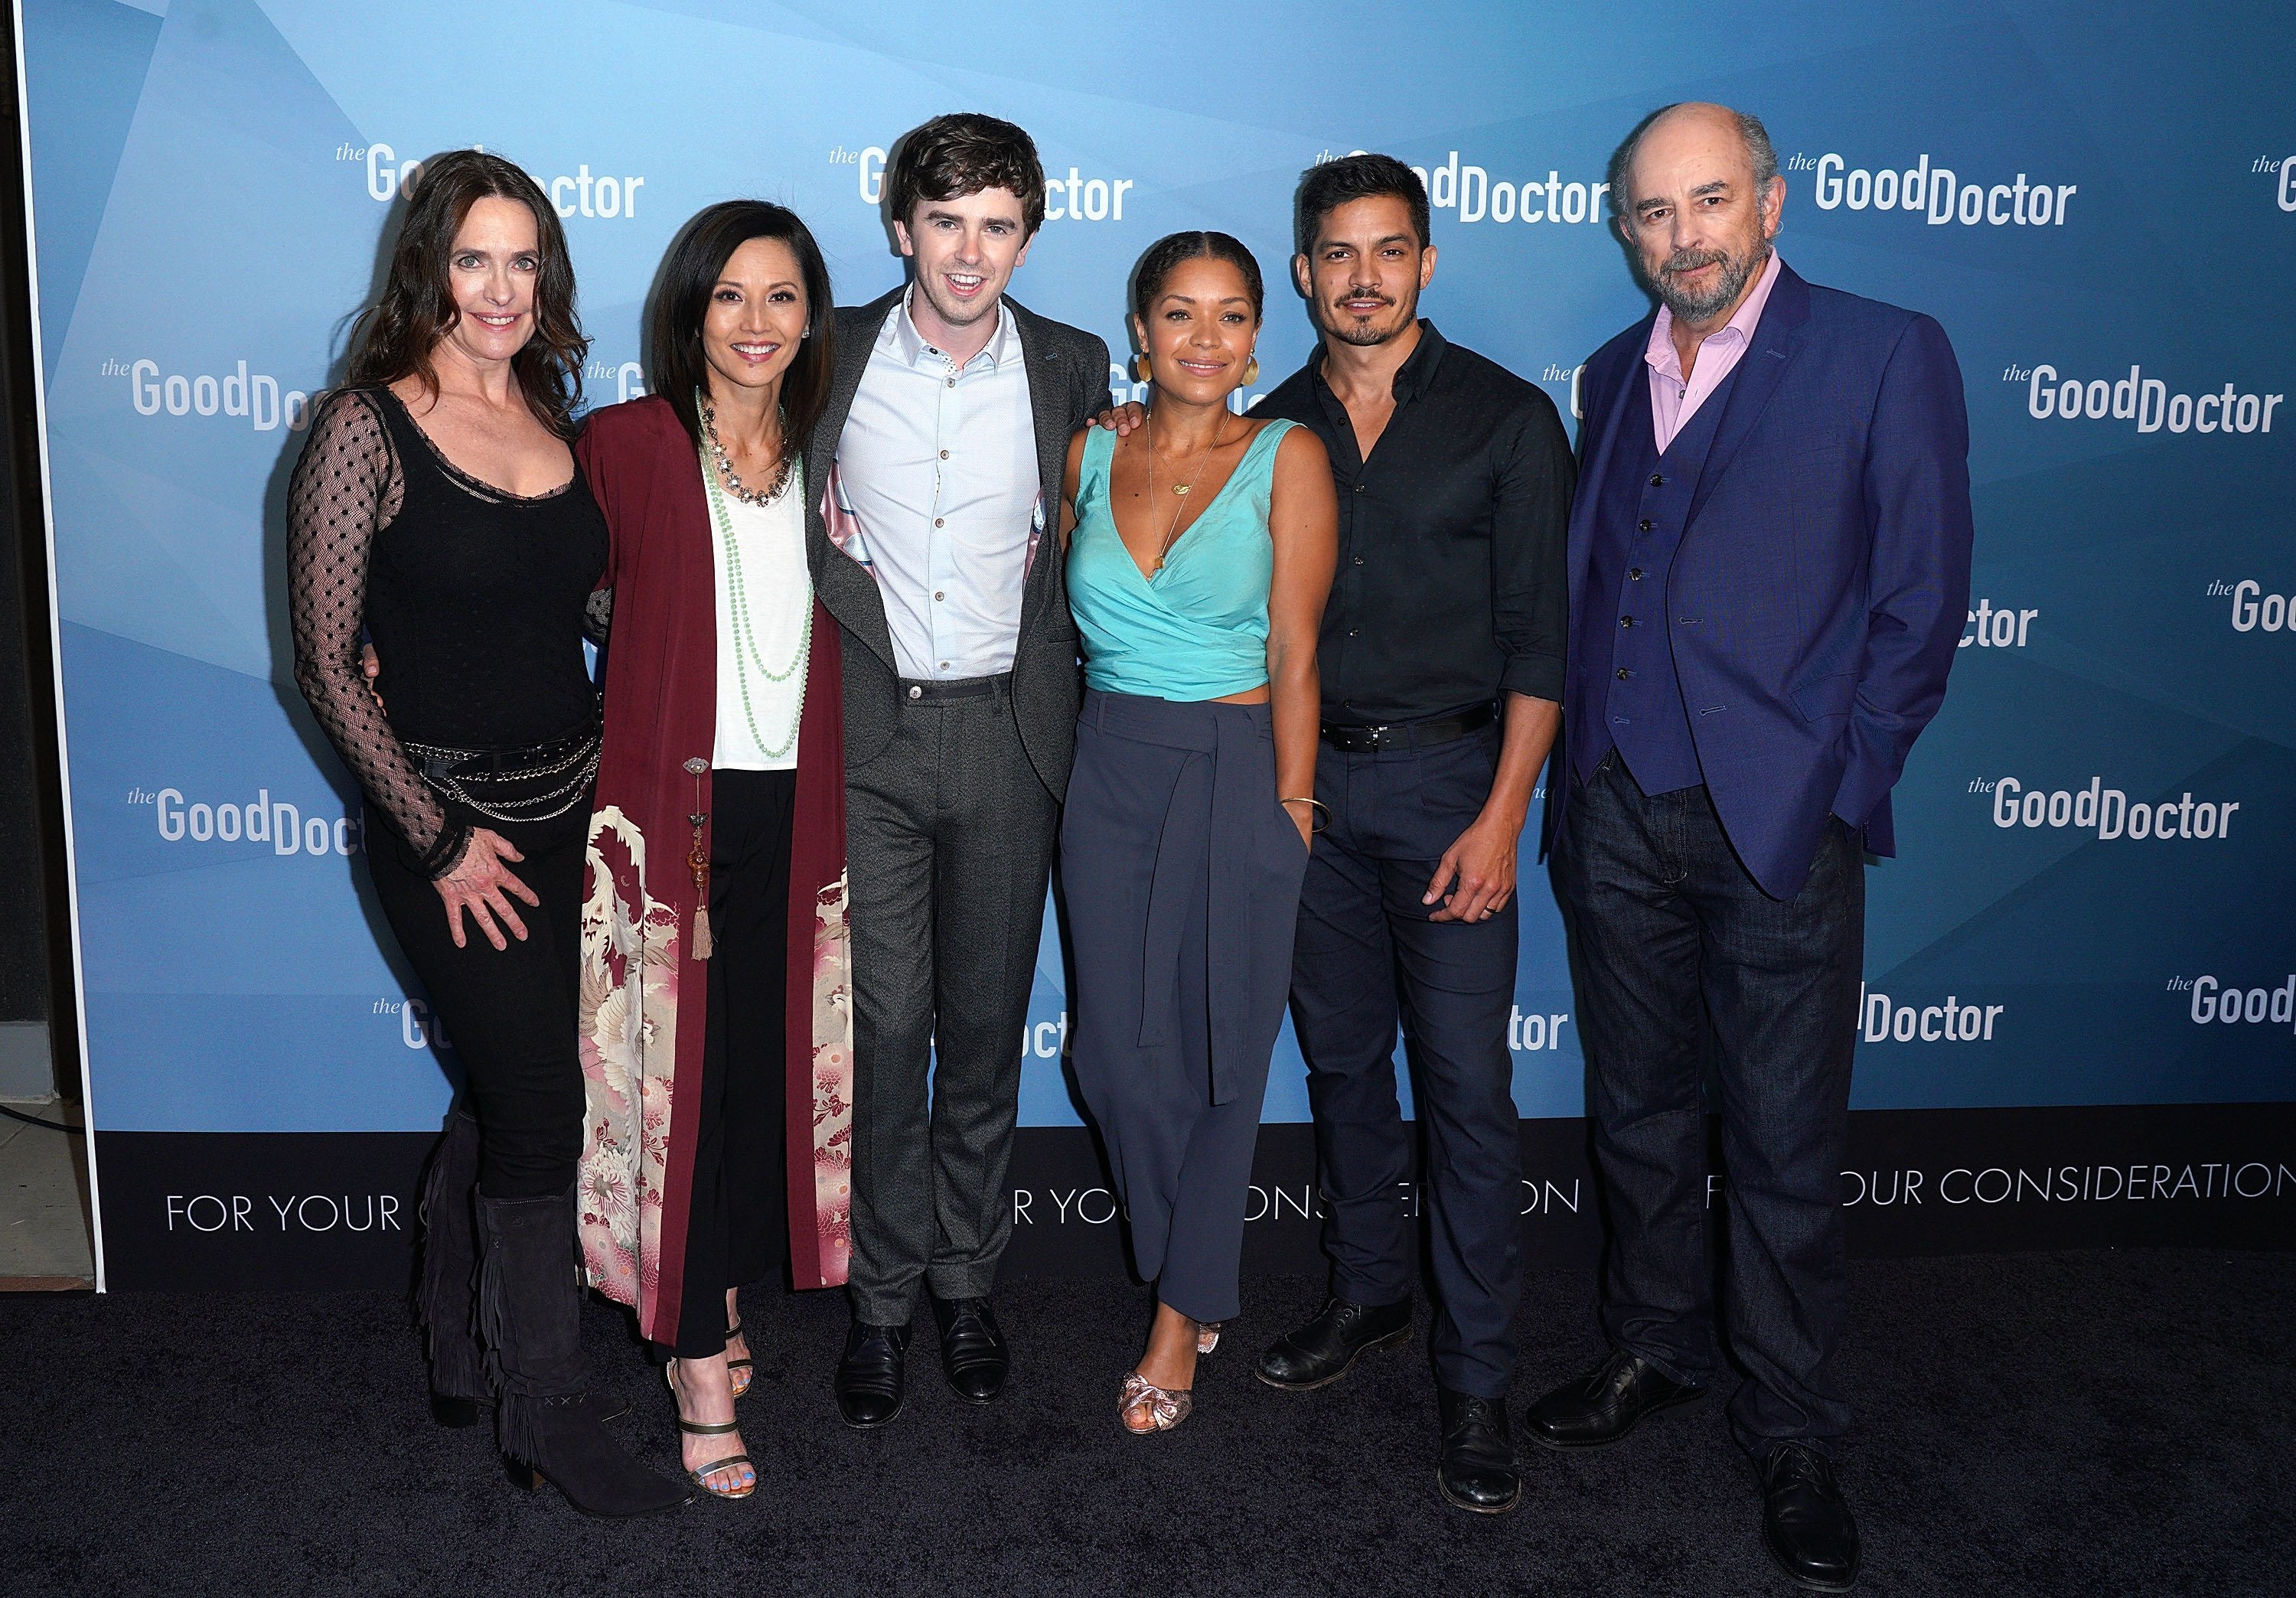 The cast of "The Good Doctor" attends For Your Consideration Event in Culver City on May 22, 2018 | Photo: Getty Images